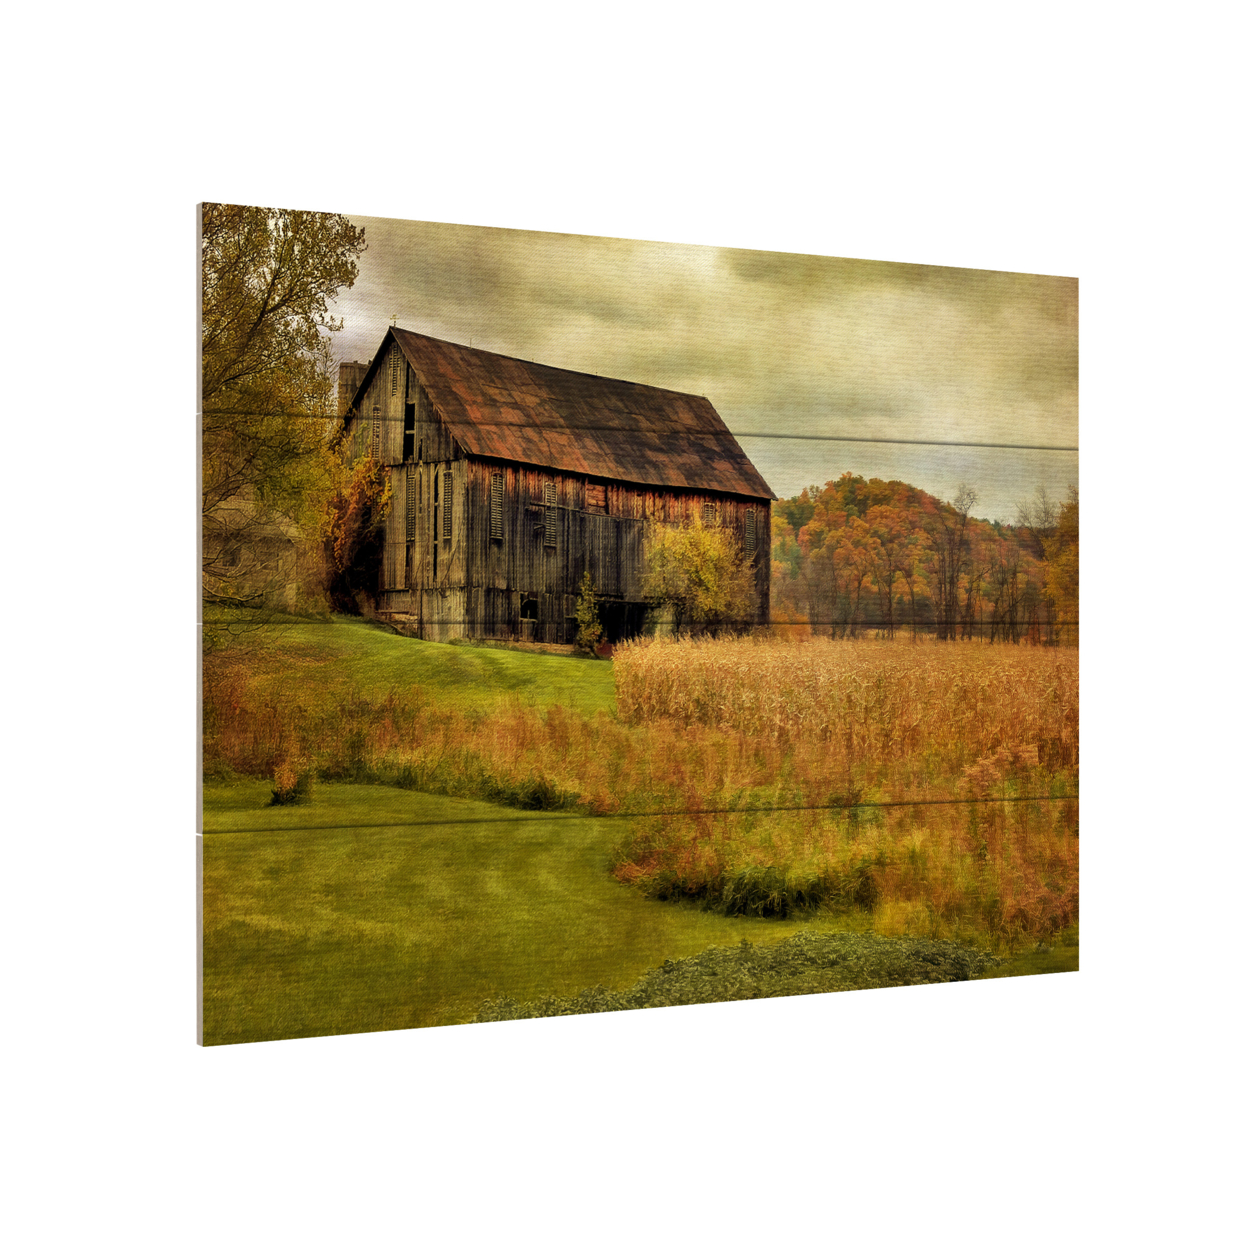 Wall Art 12 X 16 Inches Titled Old Barn On Rainy Day Ready To Hang Printed On Wooden Planks